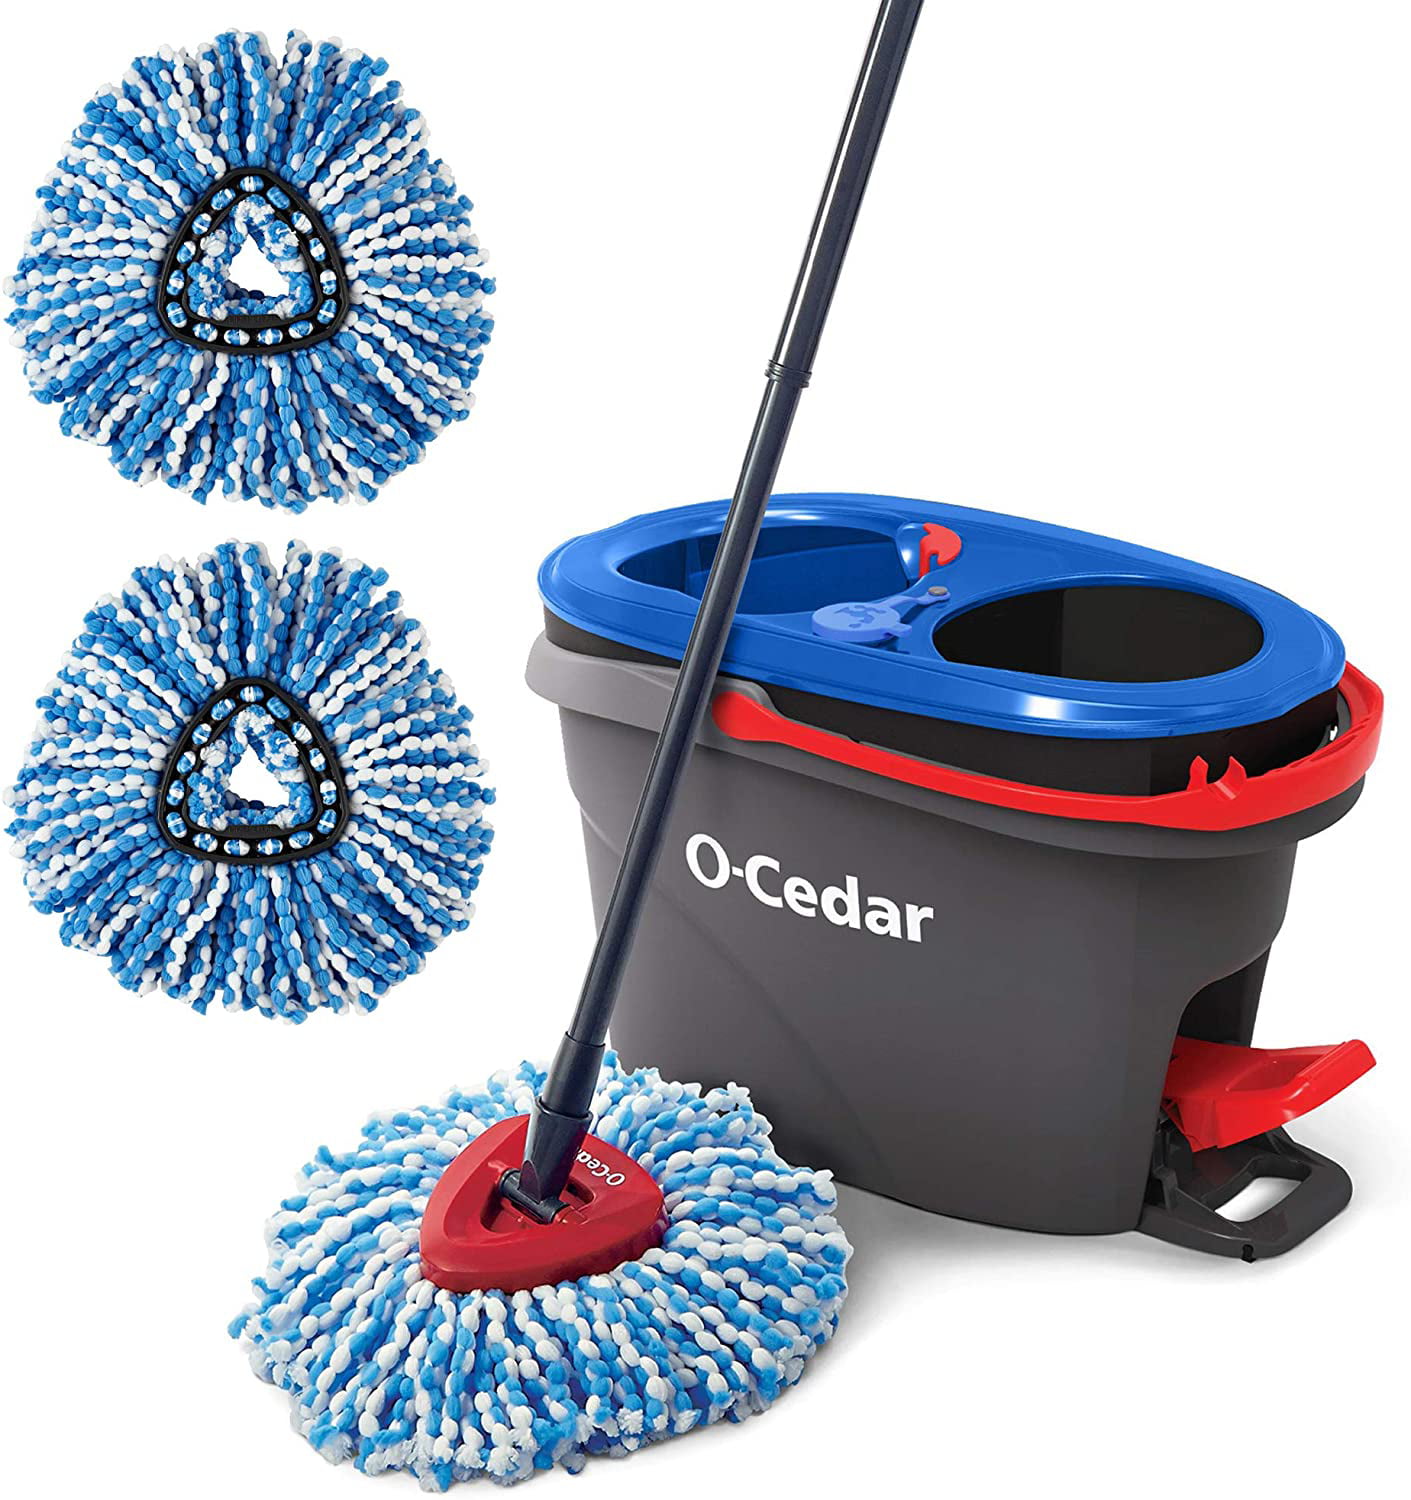 Includes Scrub Brush Stainless Steel Deluxe Rolling Spin Mop By Mopnado 